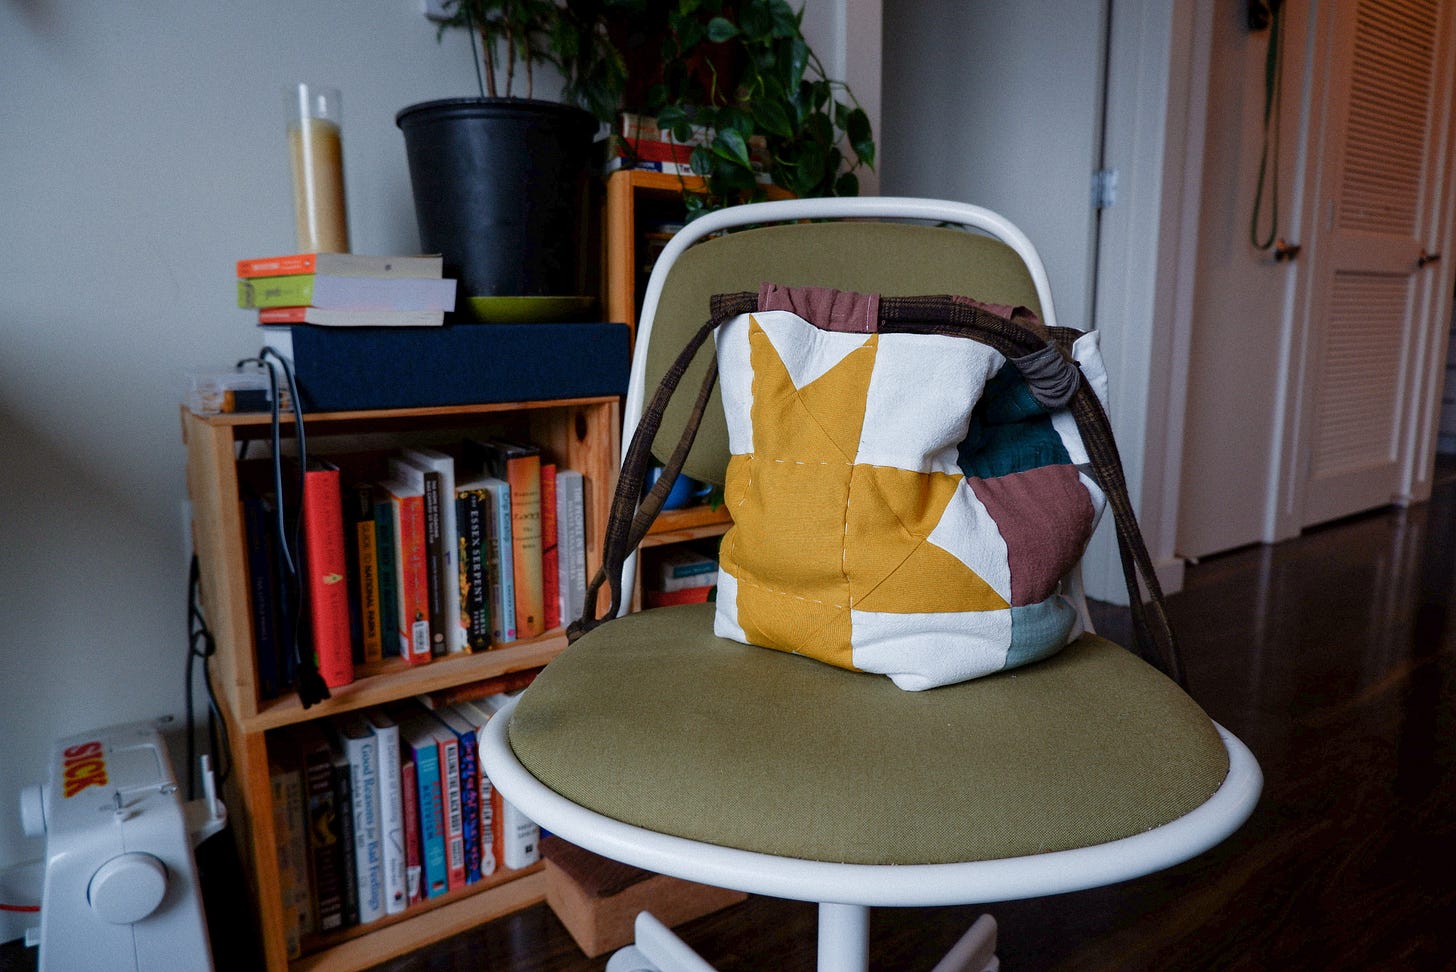 quilted bag with a yellow star sitting on a green and white rolling chair. the chair is in front of crate bookshelves with plants and a printer on top